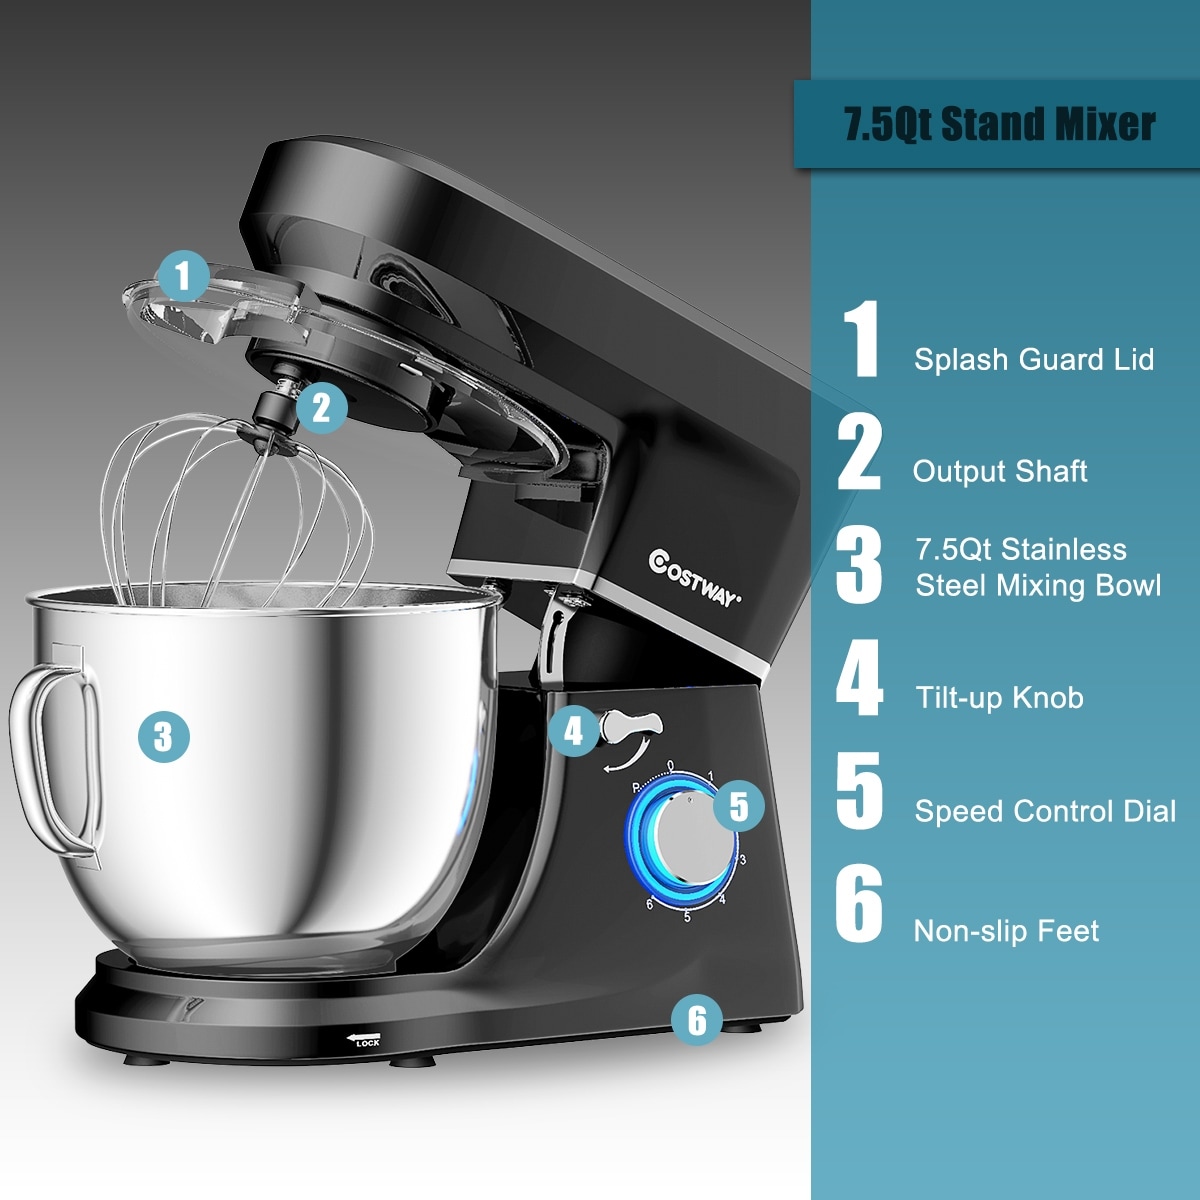  Electric Stand Mixer, UTALENT 6 Adjustable Speeds Automatic  Tilt-Head Mixer with Flex Edge Beater(Bowl Scraper), Egg Whisk, Dough Hook,  Flat Beater, Cakes and Cookies,White: Home & Kitchen